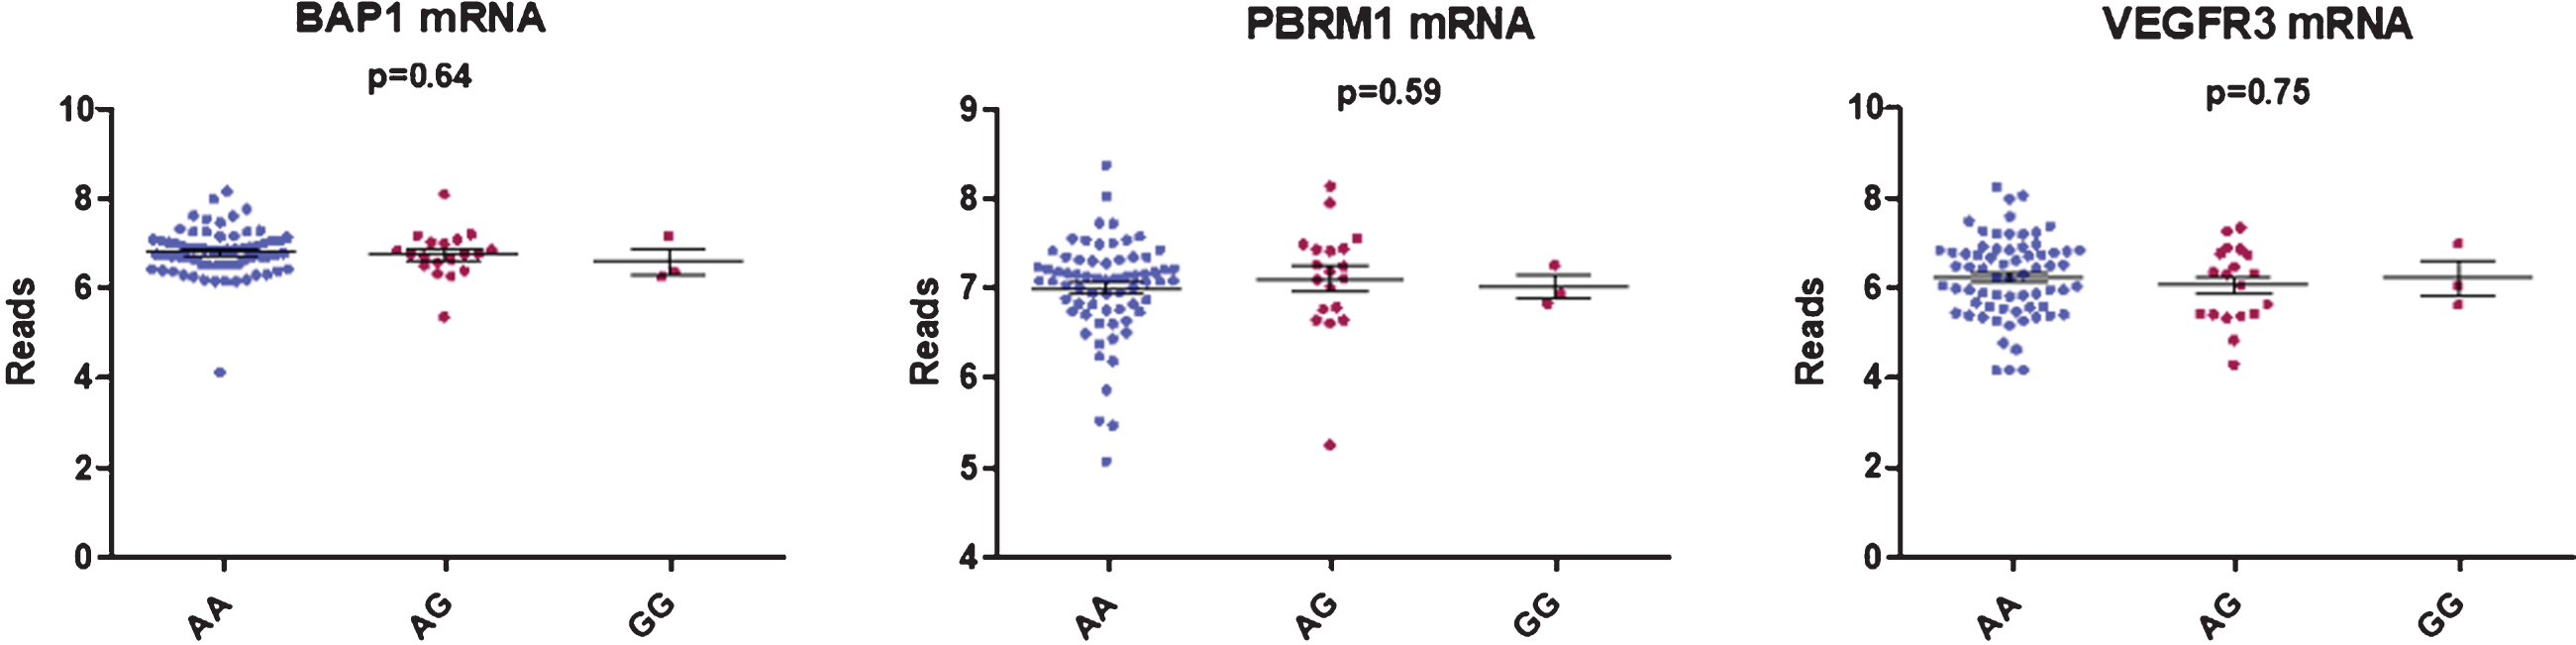 Boxplot showing the correlation between BAP1, PBRM1 and VEGFR3 mRNA expression and rs307826 genotypes (ANOVA).